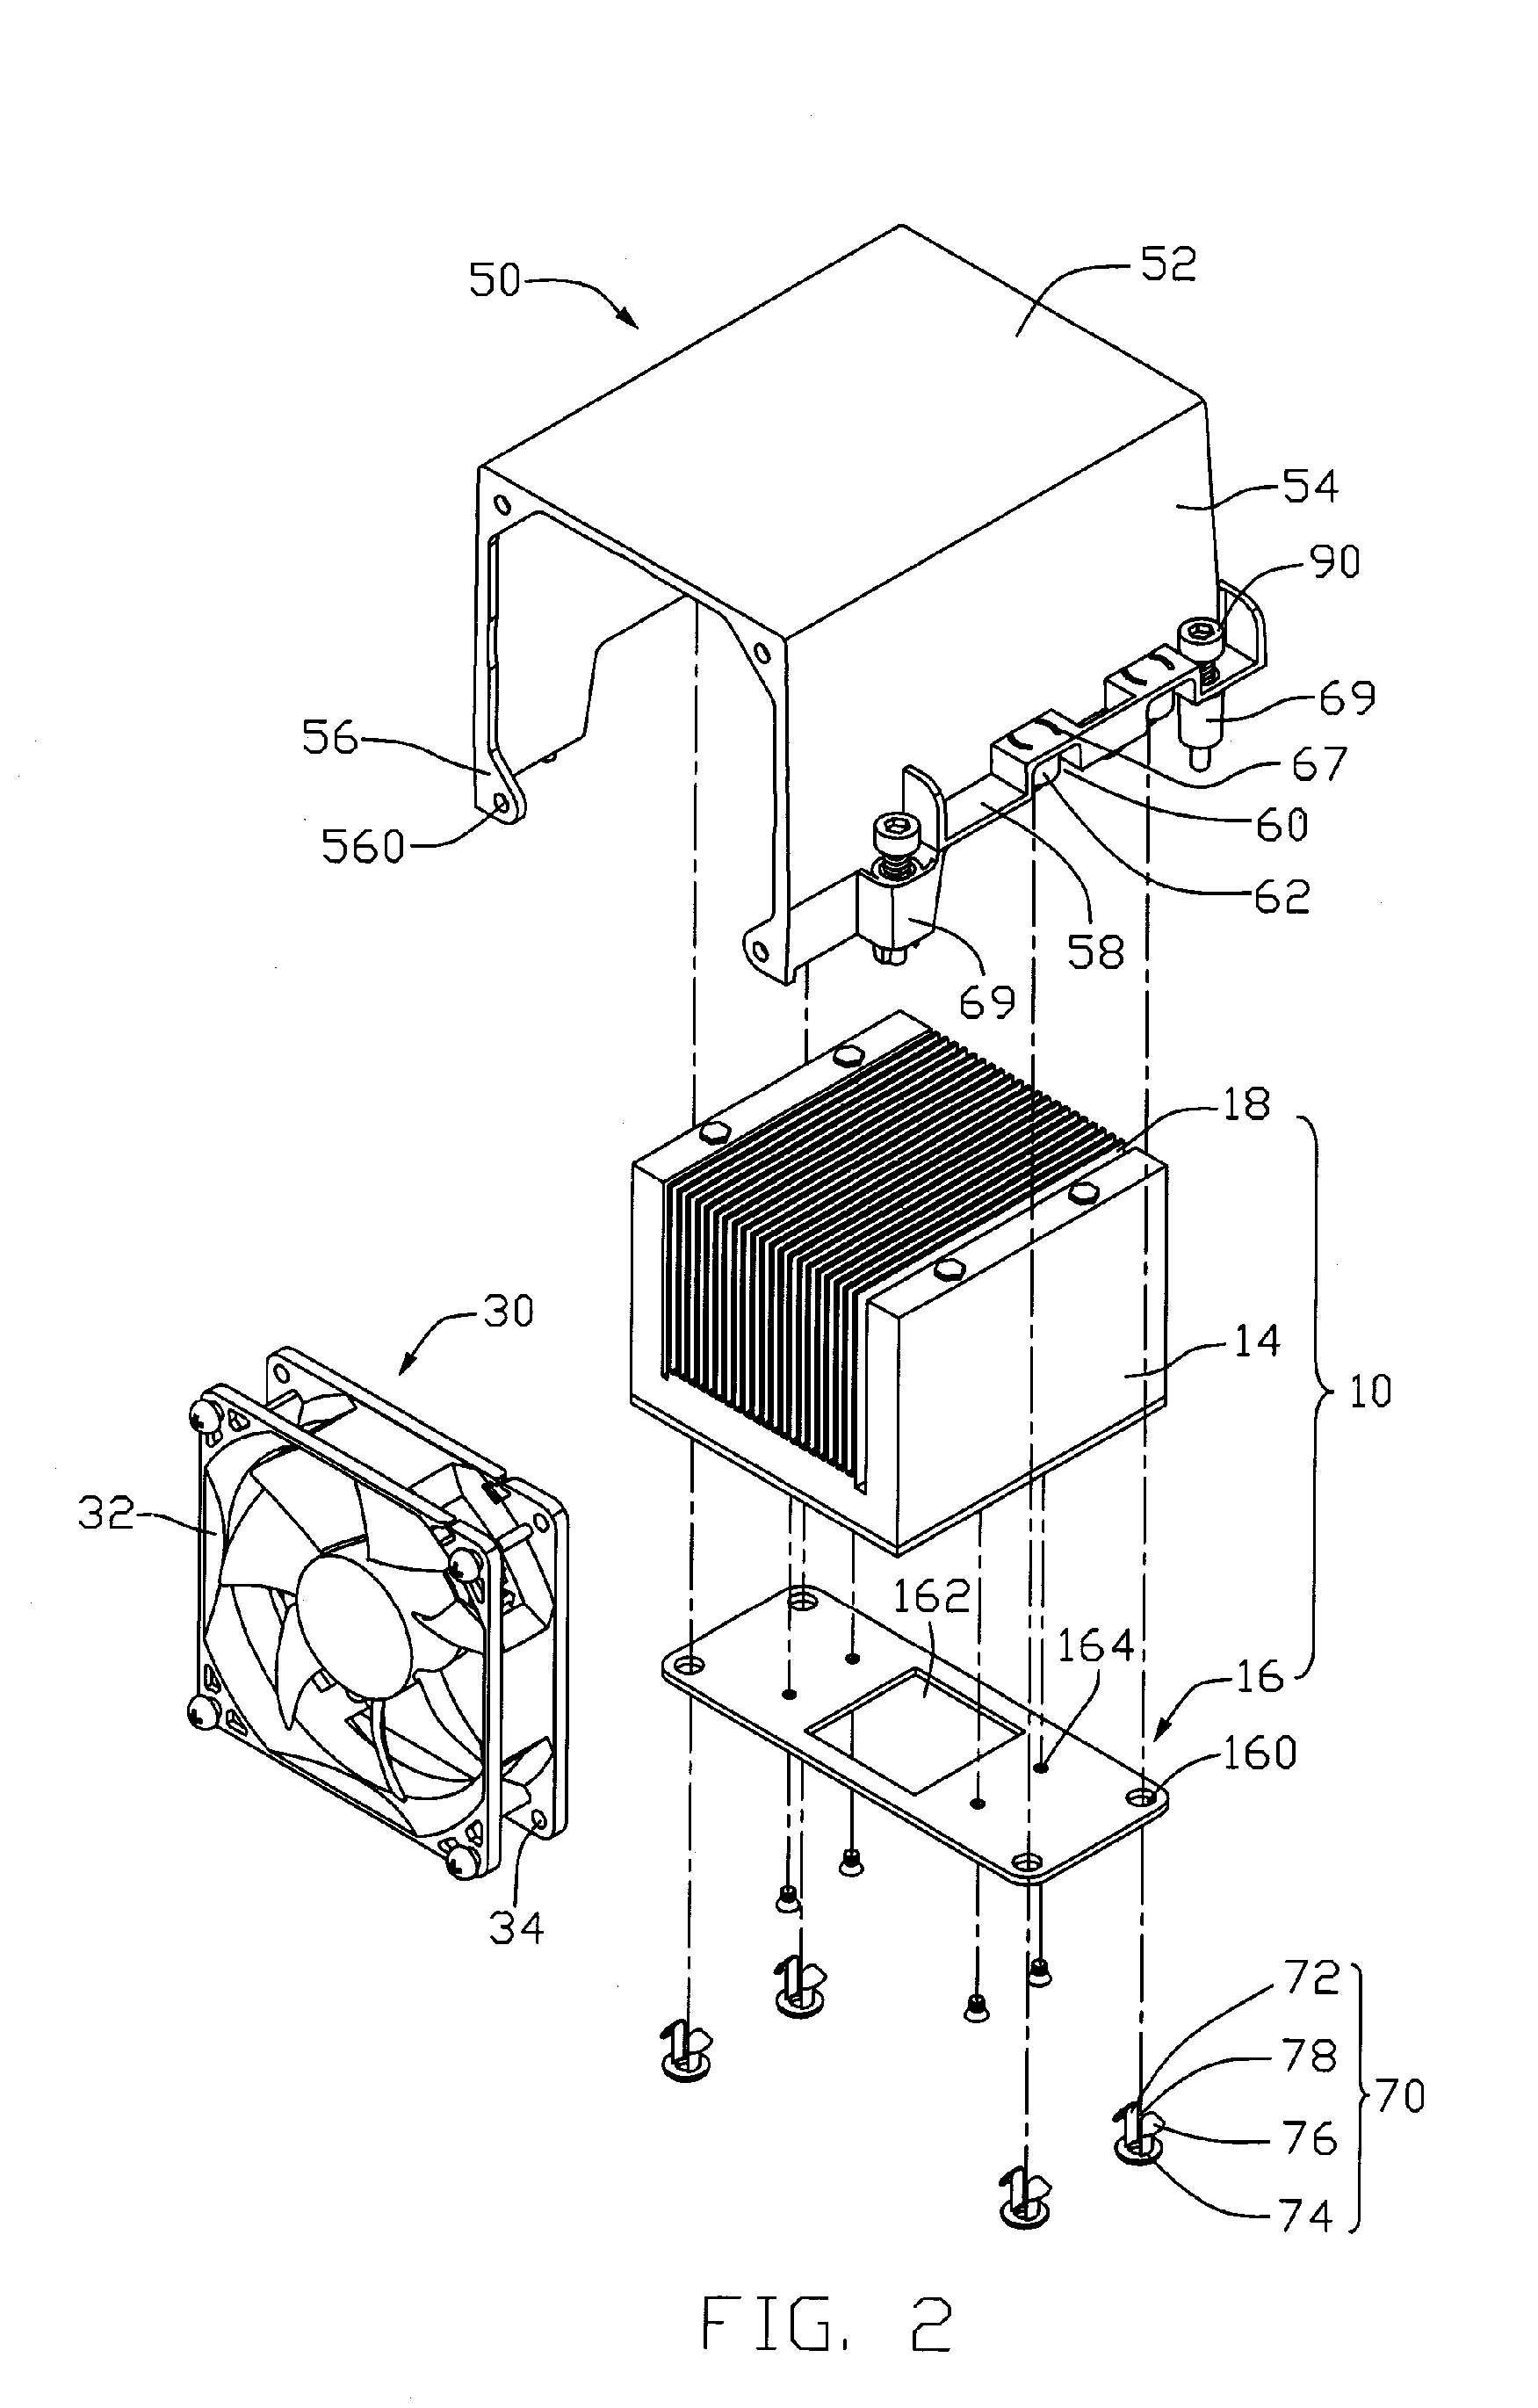 Cooling device incorporating boiling chamber